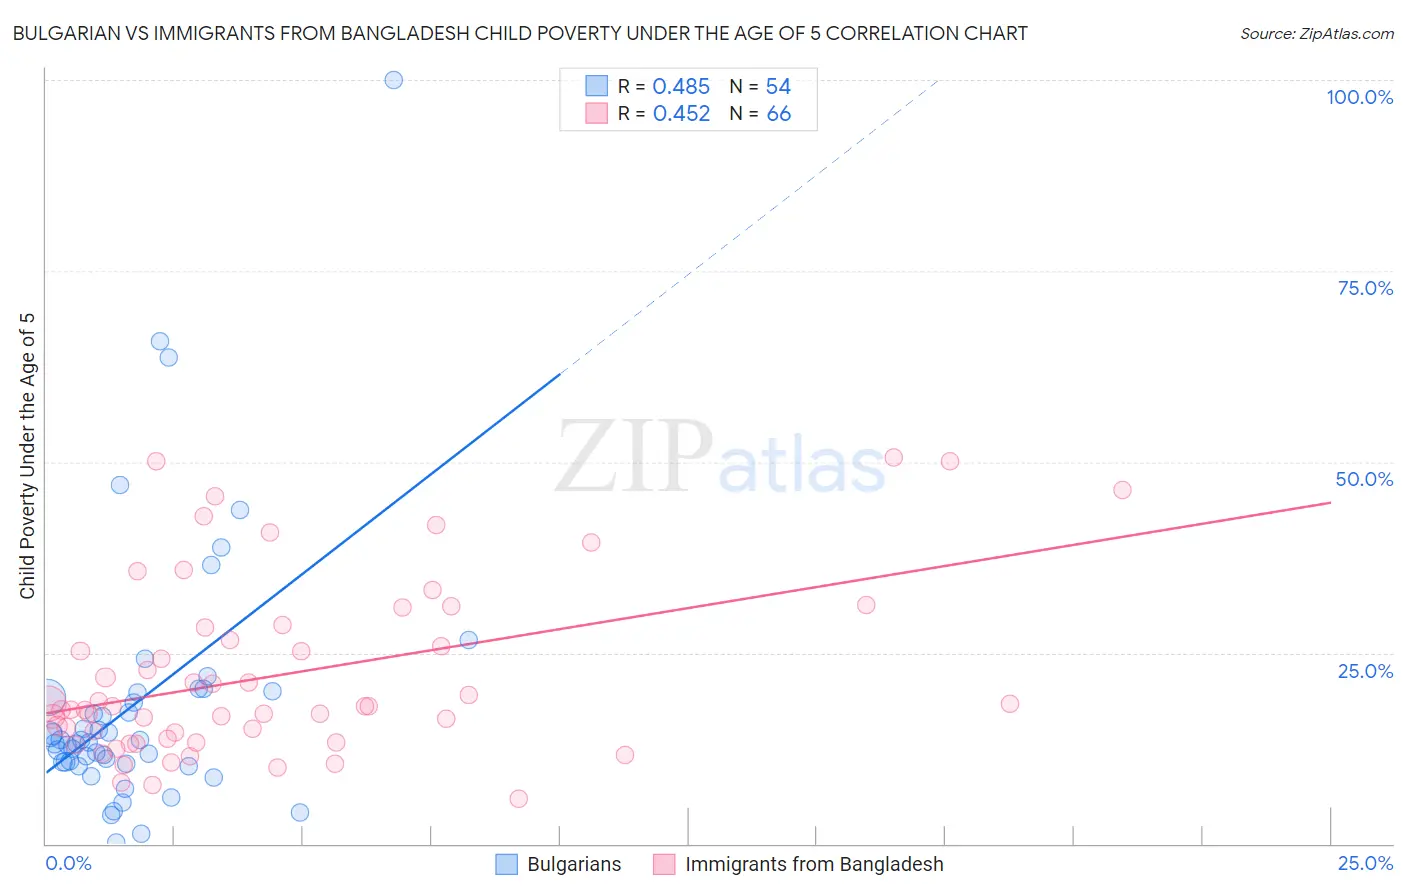 Bulgarian vs Immigrants from Bangladesh Child Poverty Under the Age of 5